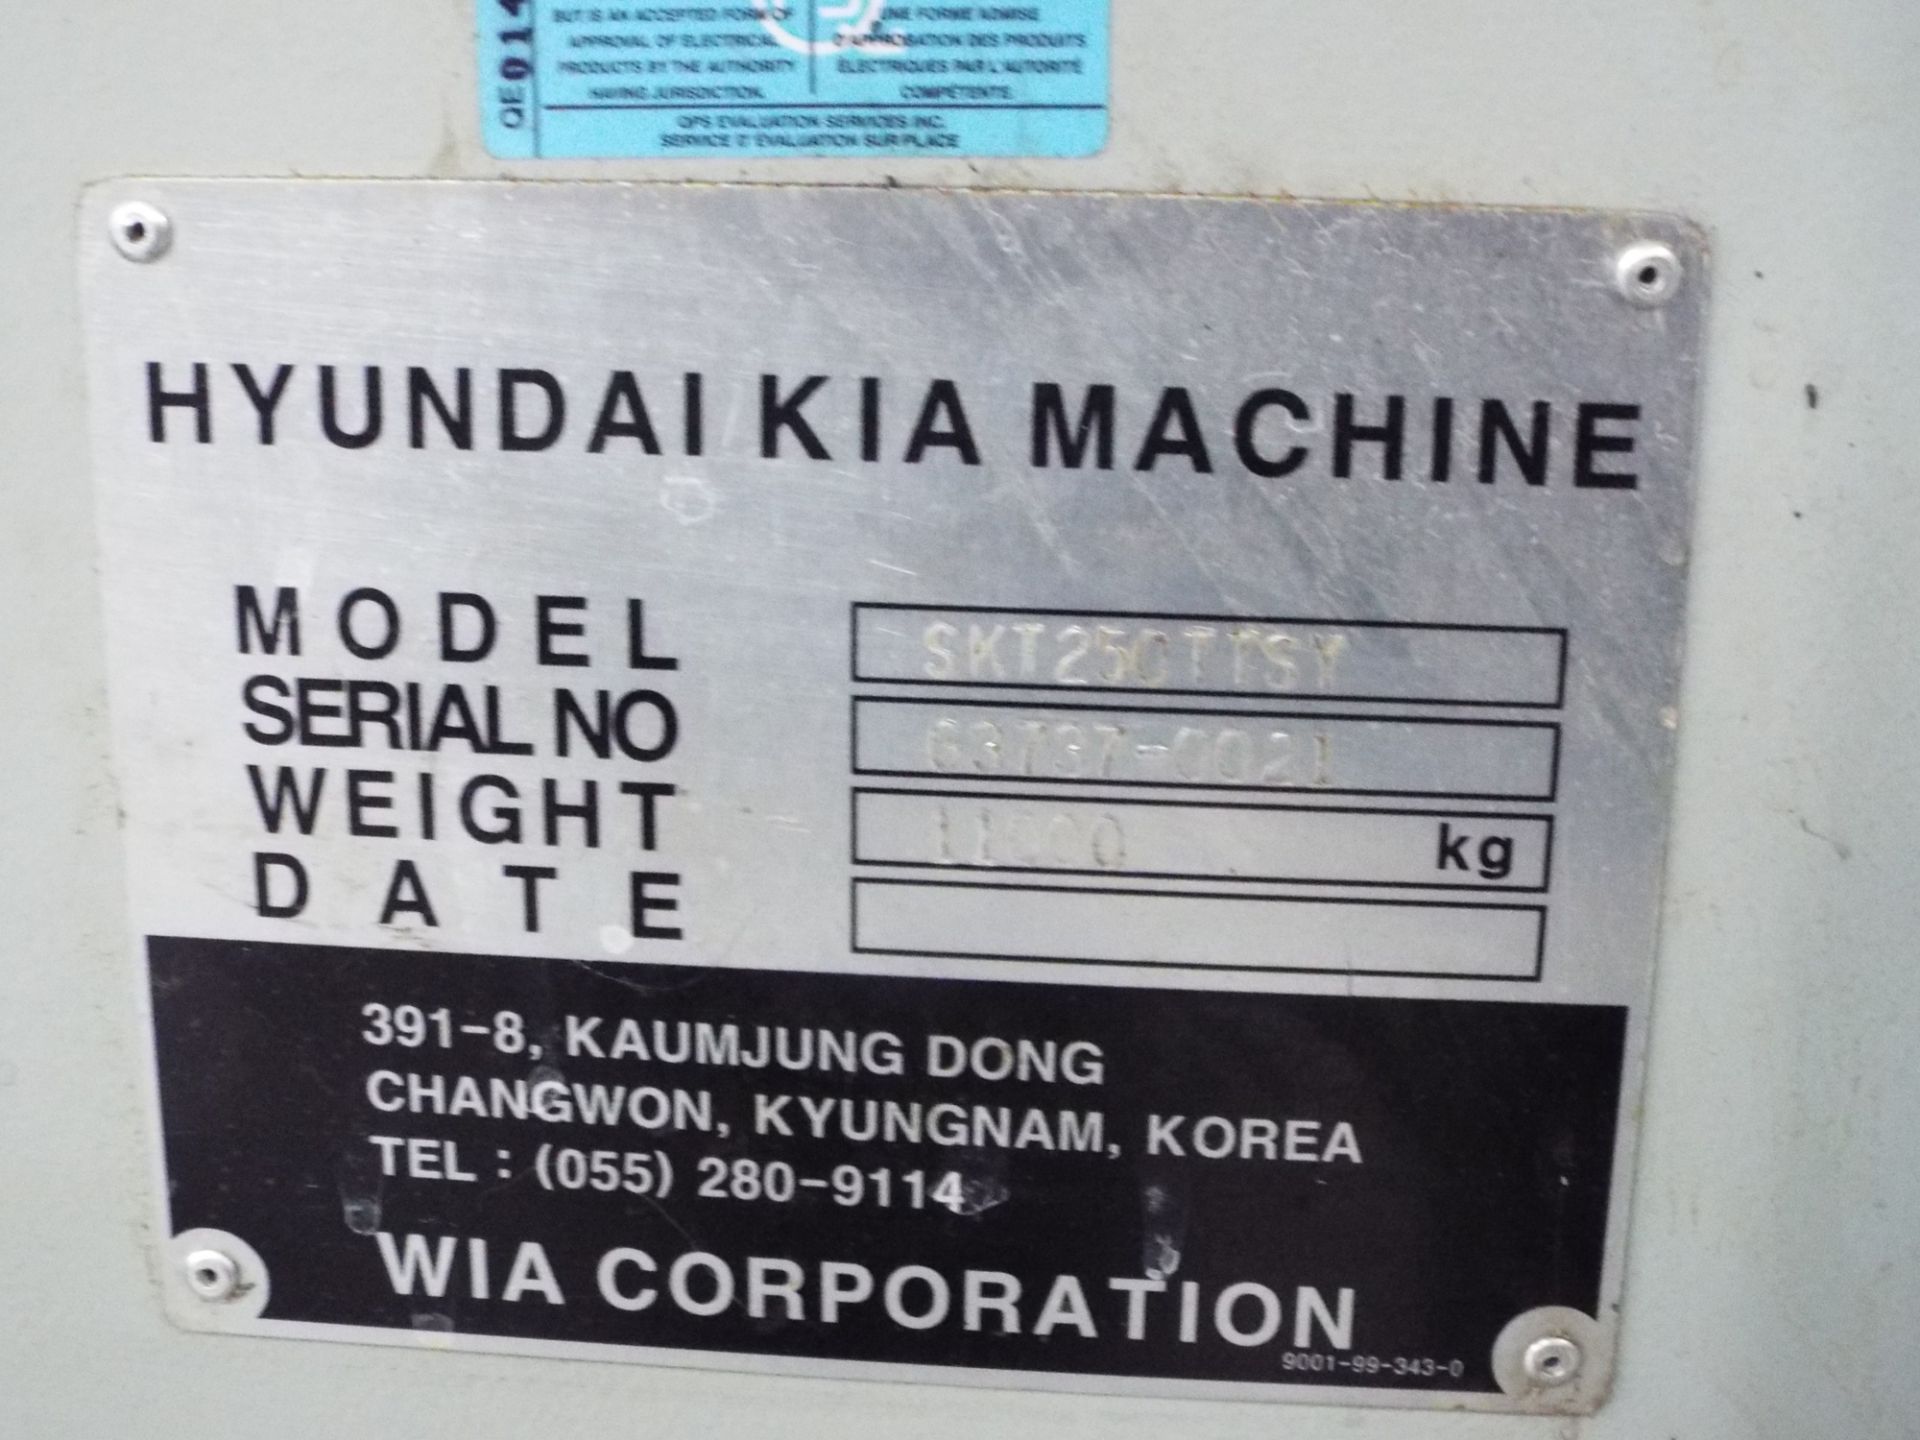 HYUNDAI KIA (2009) SKT250TTSY CNC MULTI-AXIS, OPPOSED SPINDLE TWIN TURRET TURNING CENTER - Image 7 of 7